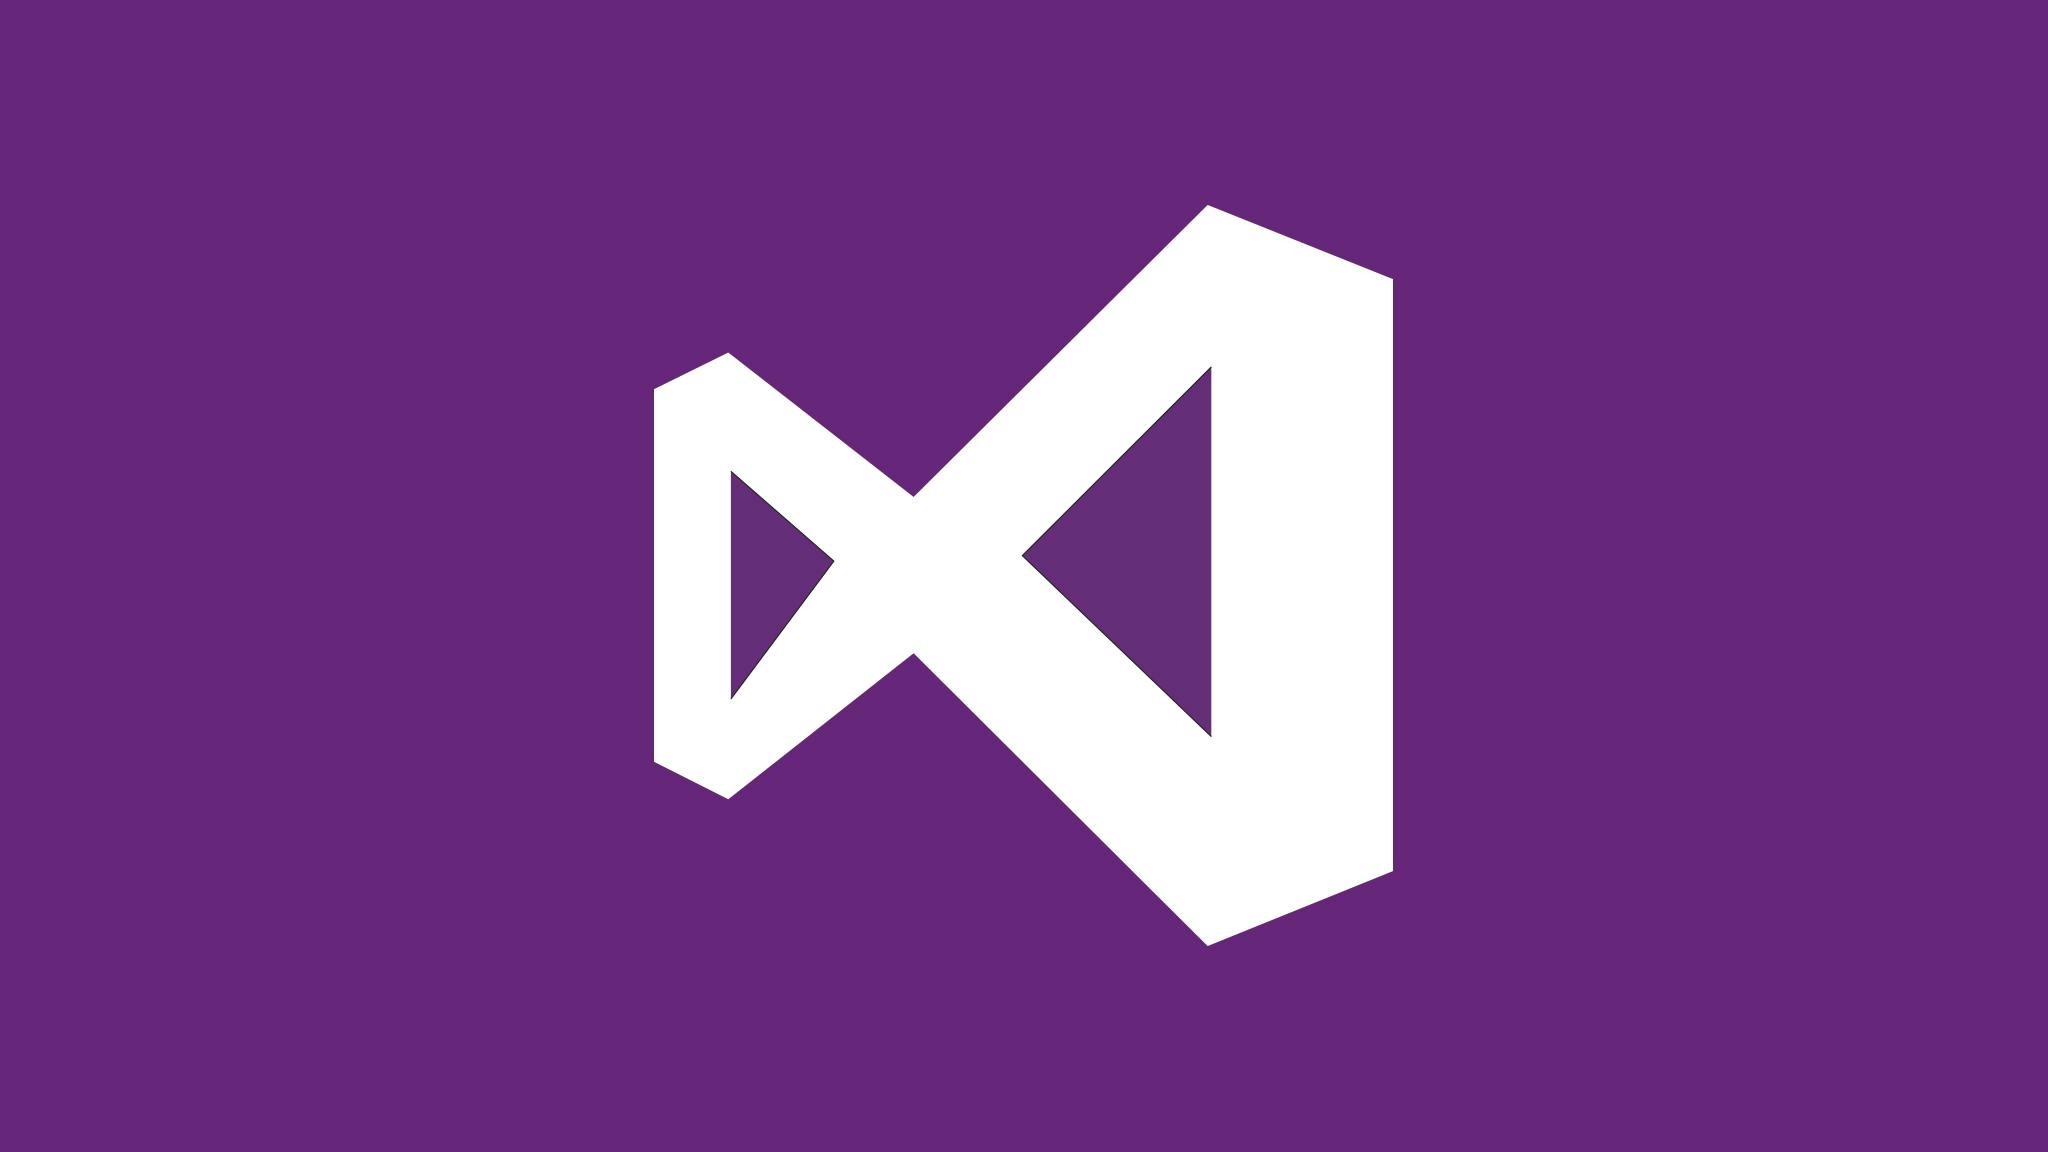 C# Developers: Double Your Coding Speed